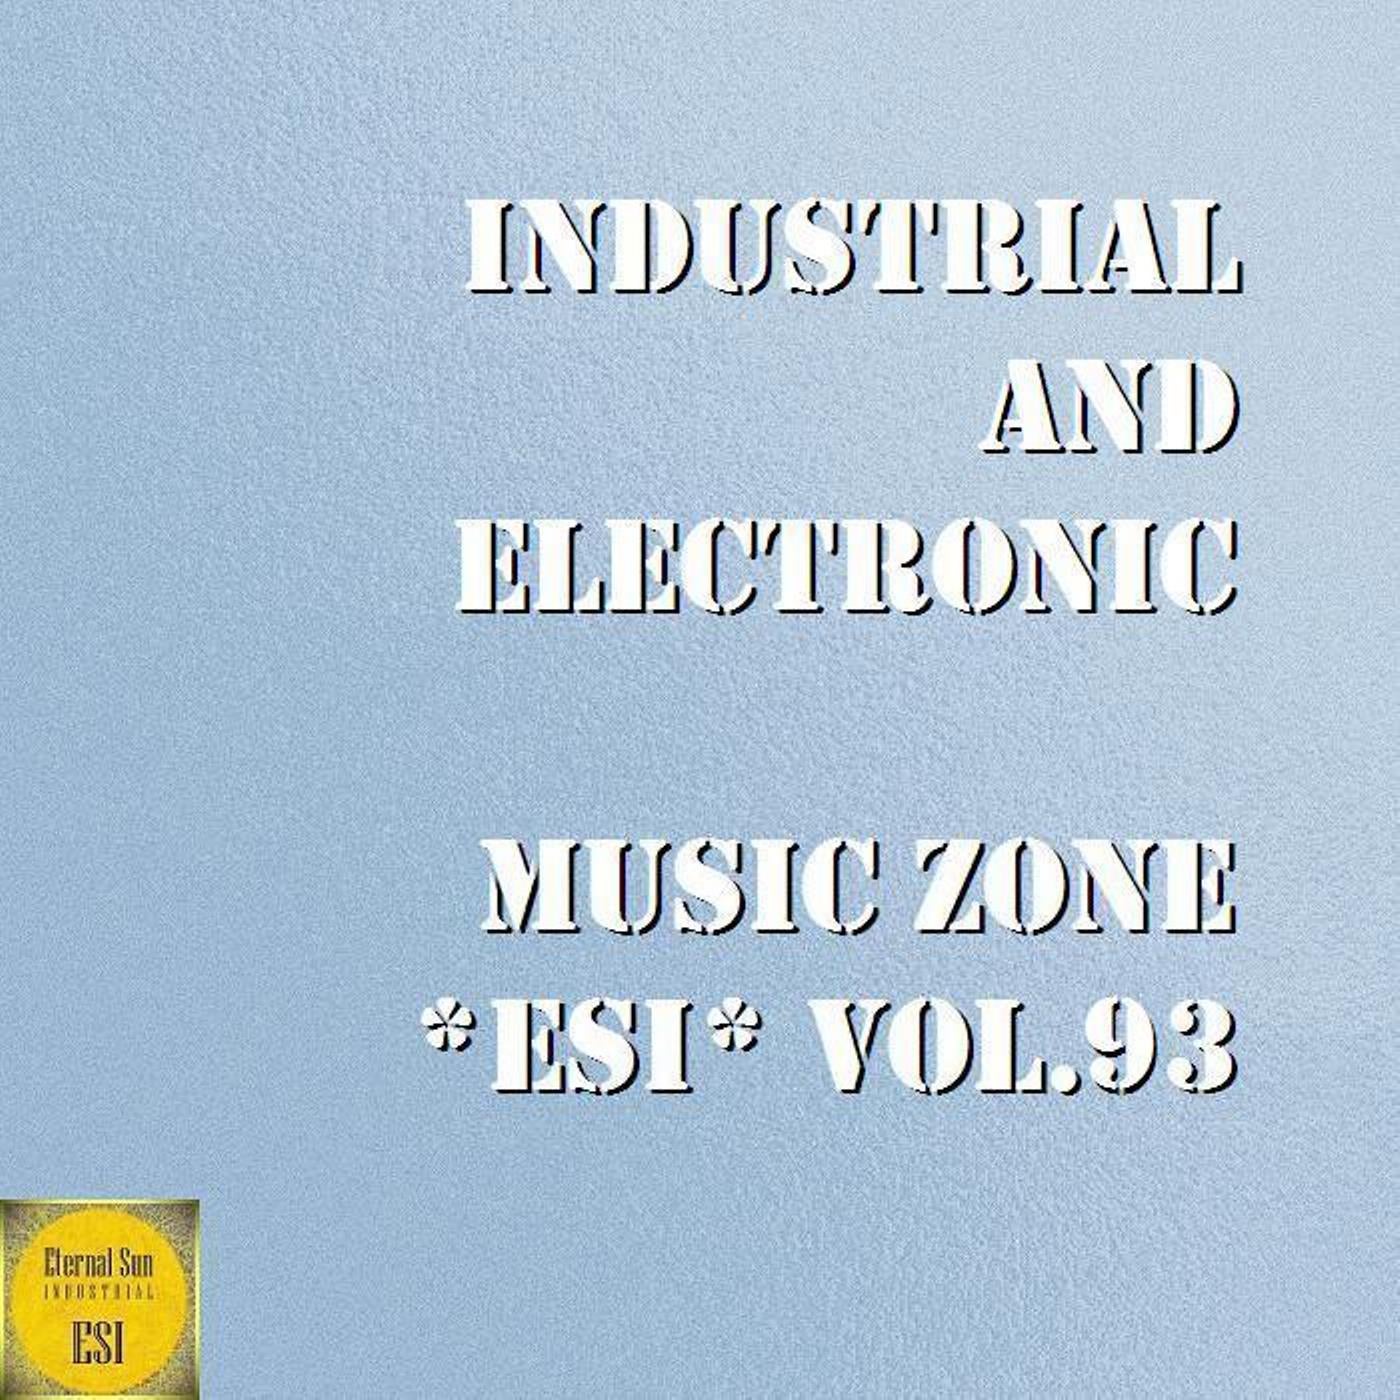 Industrial & Electronic: Music Zone Esi, Vol. 93